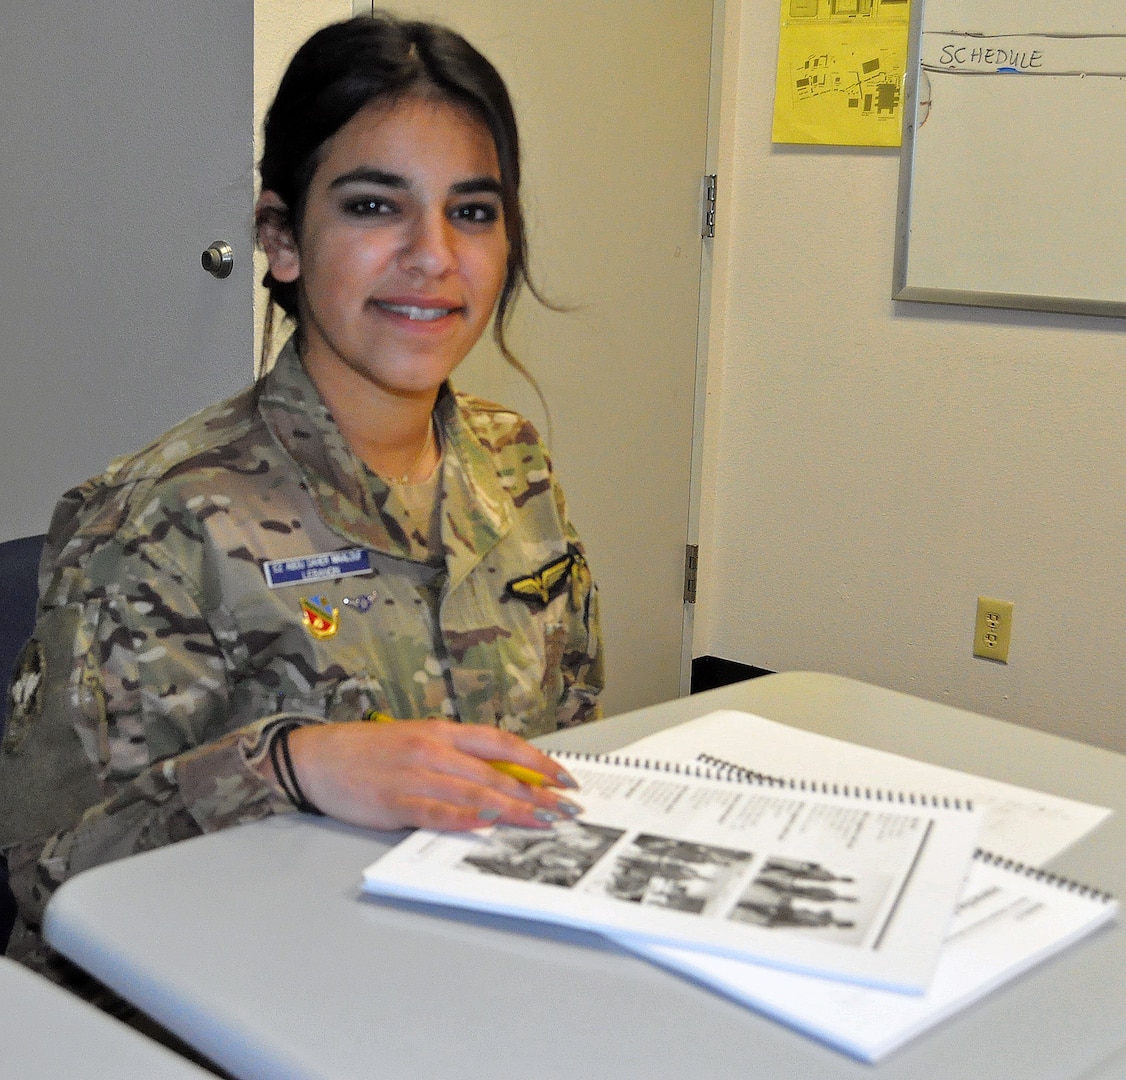 Airman Maria Abou Daher Maalouf from the Lebanese Air Force is the first female air traffic controller from her country to attend the Defense Language Institute English Language Center at Joint Base San Antonio-Lackland for English language training.